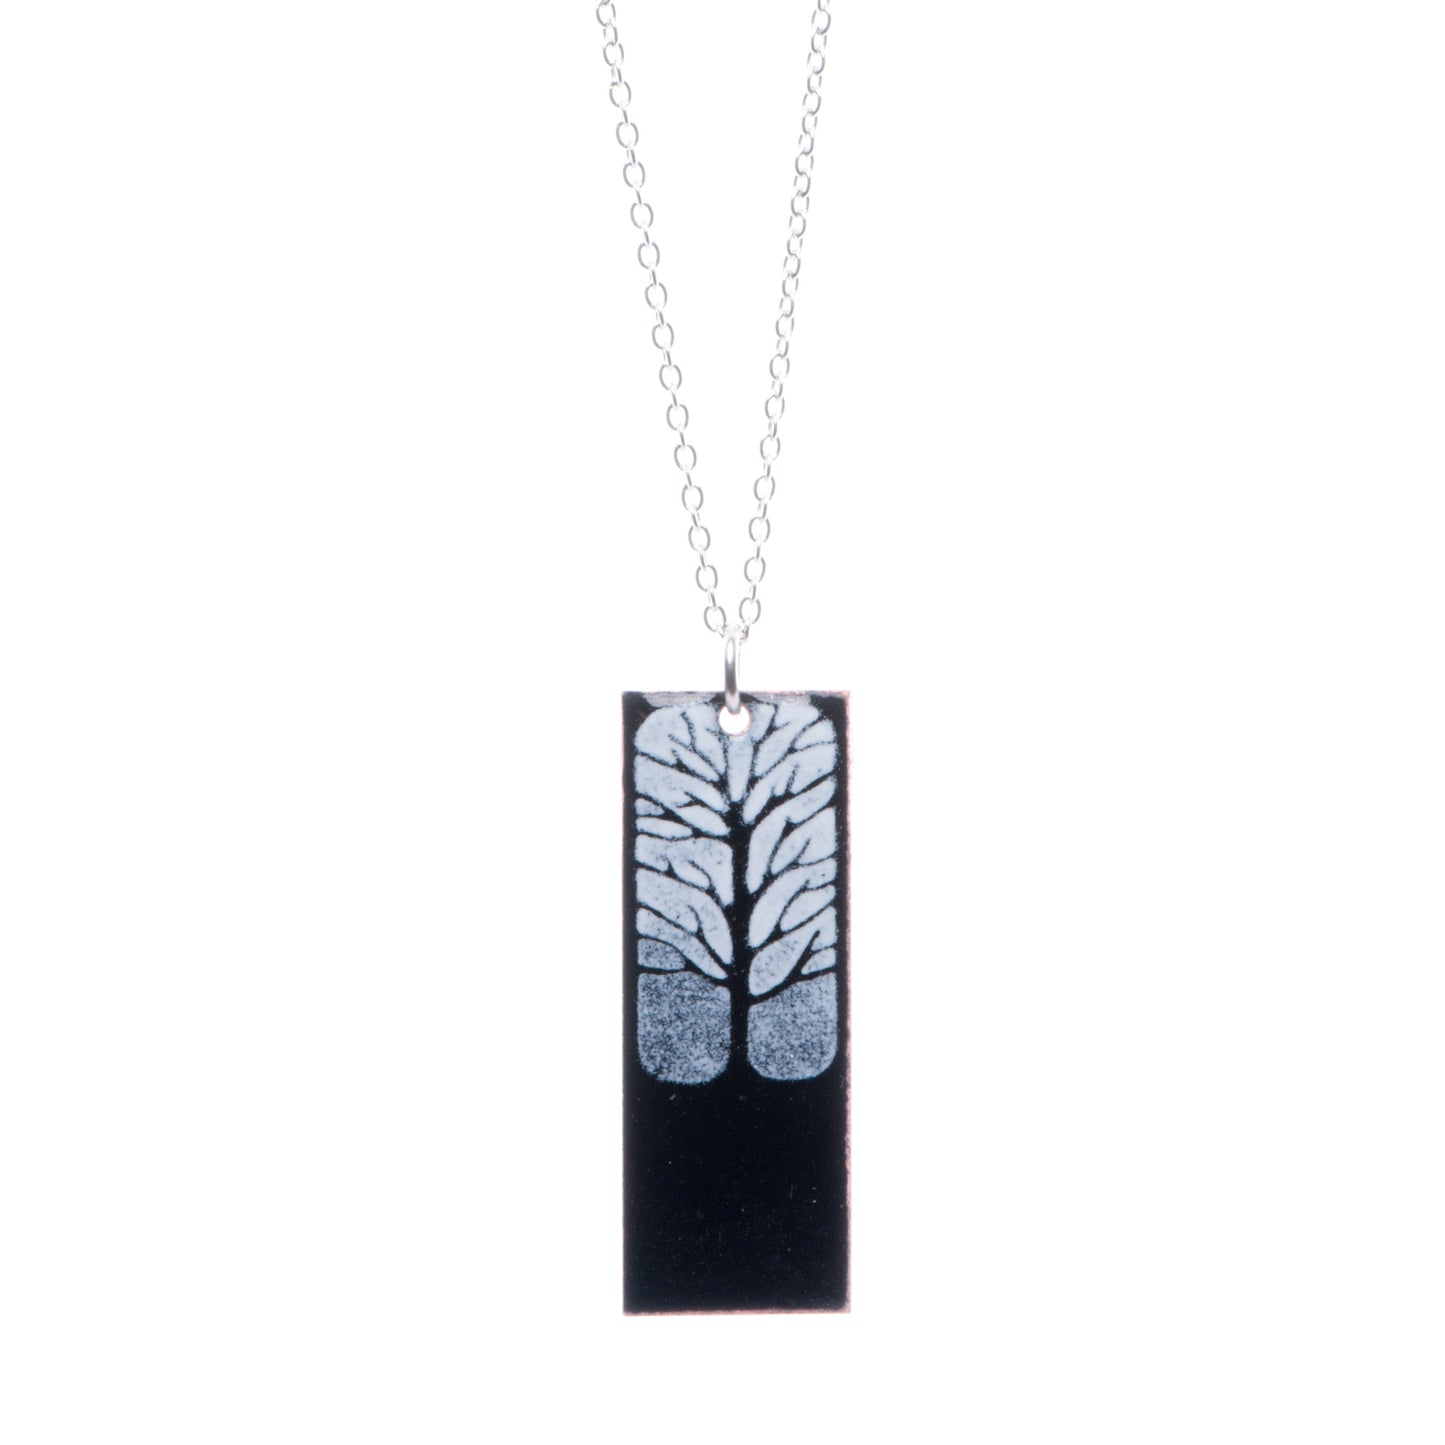 Tree Necklace in Black & White